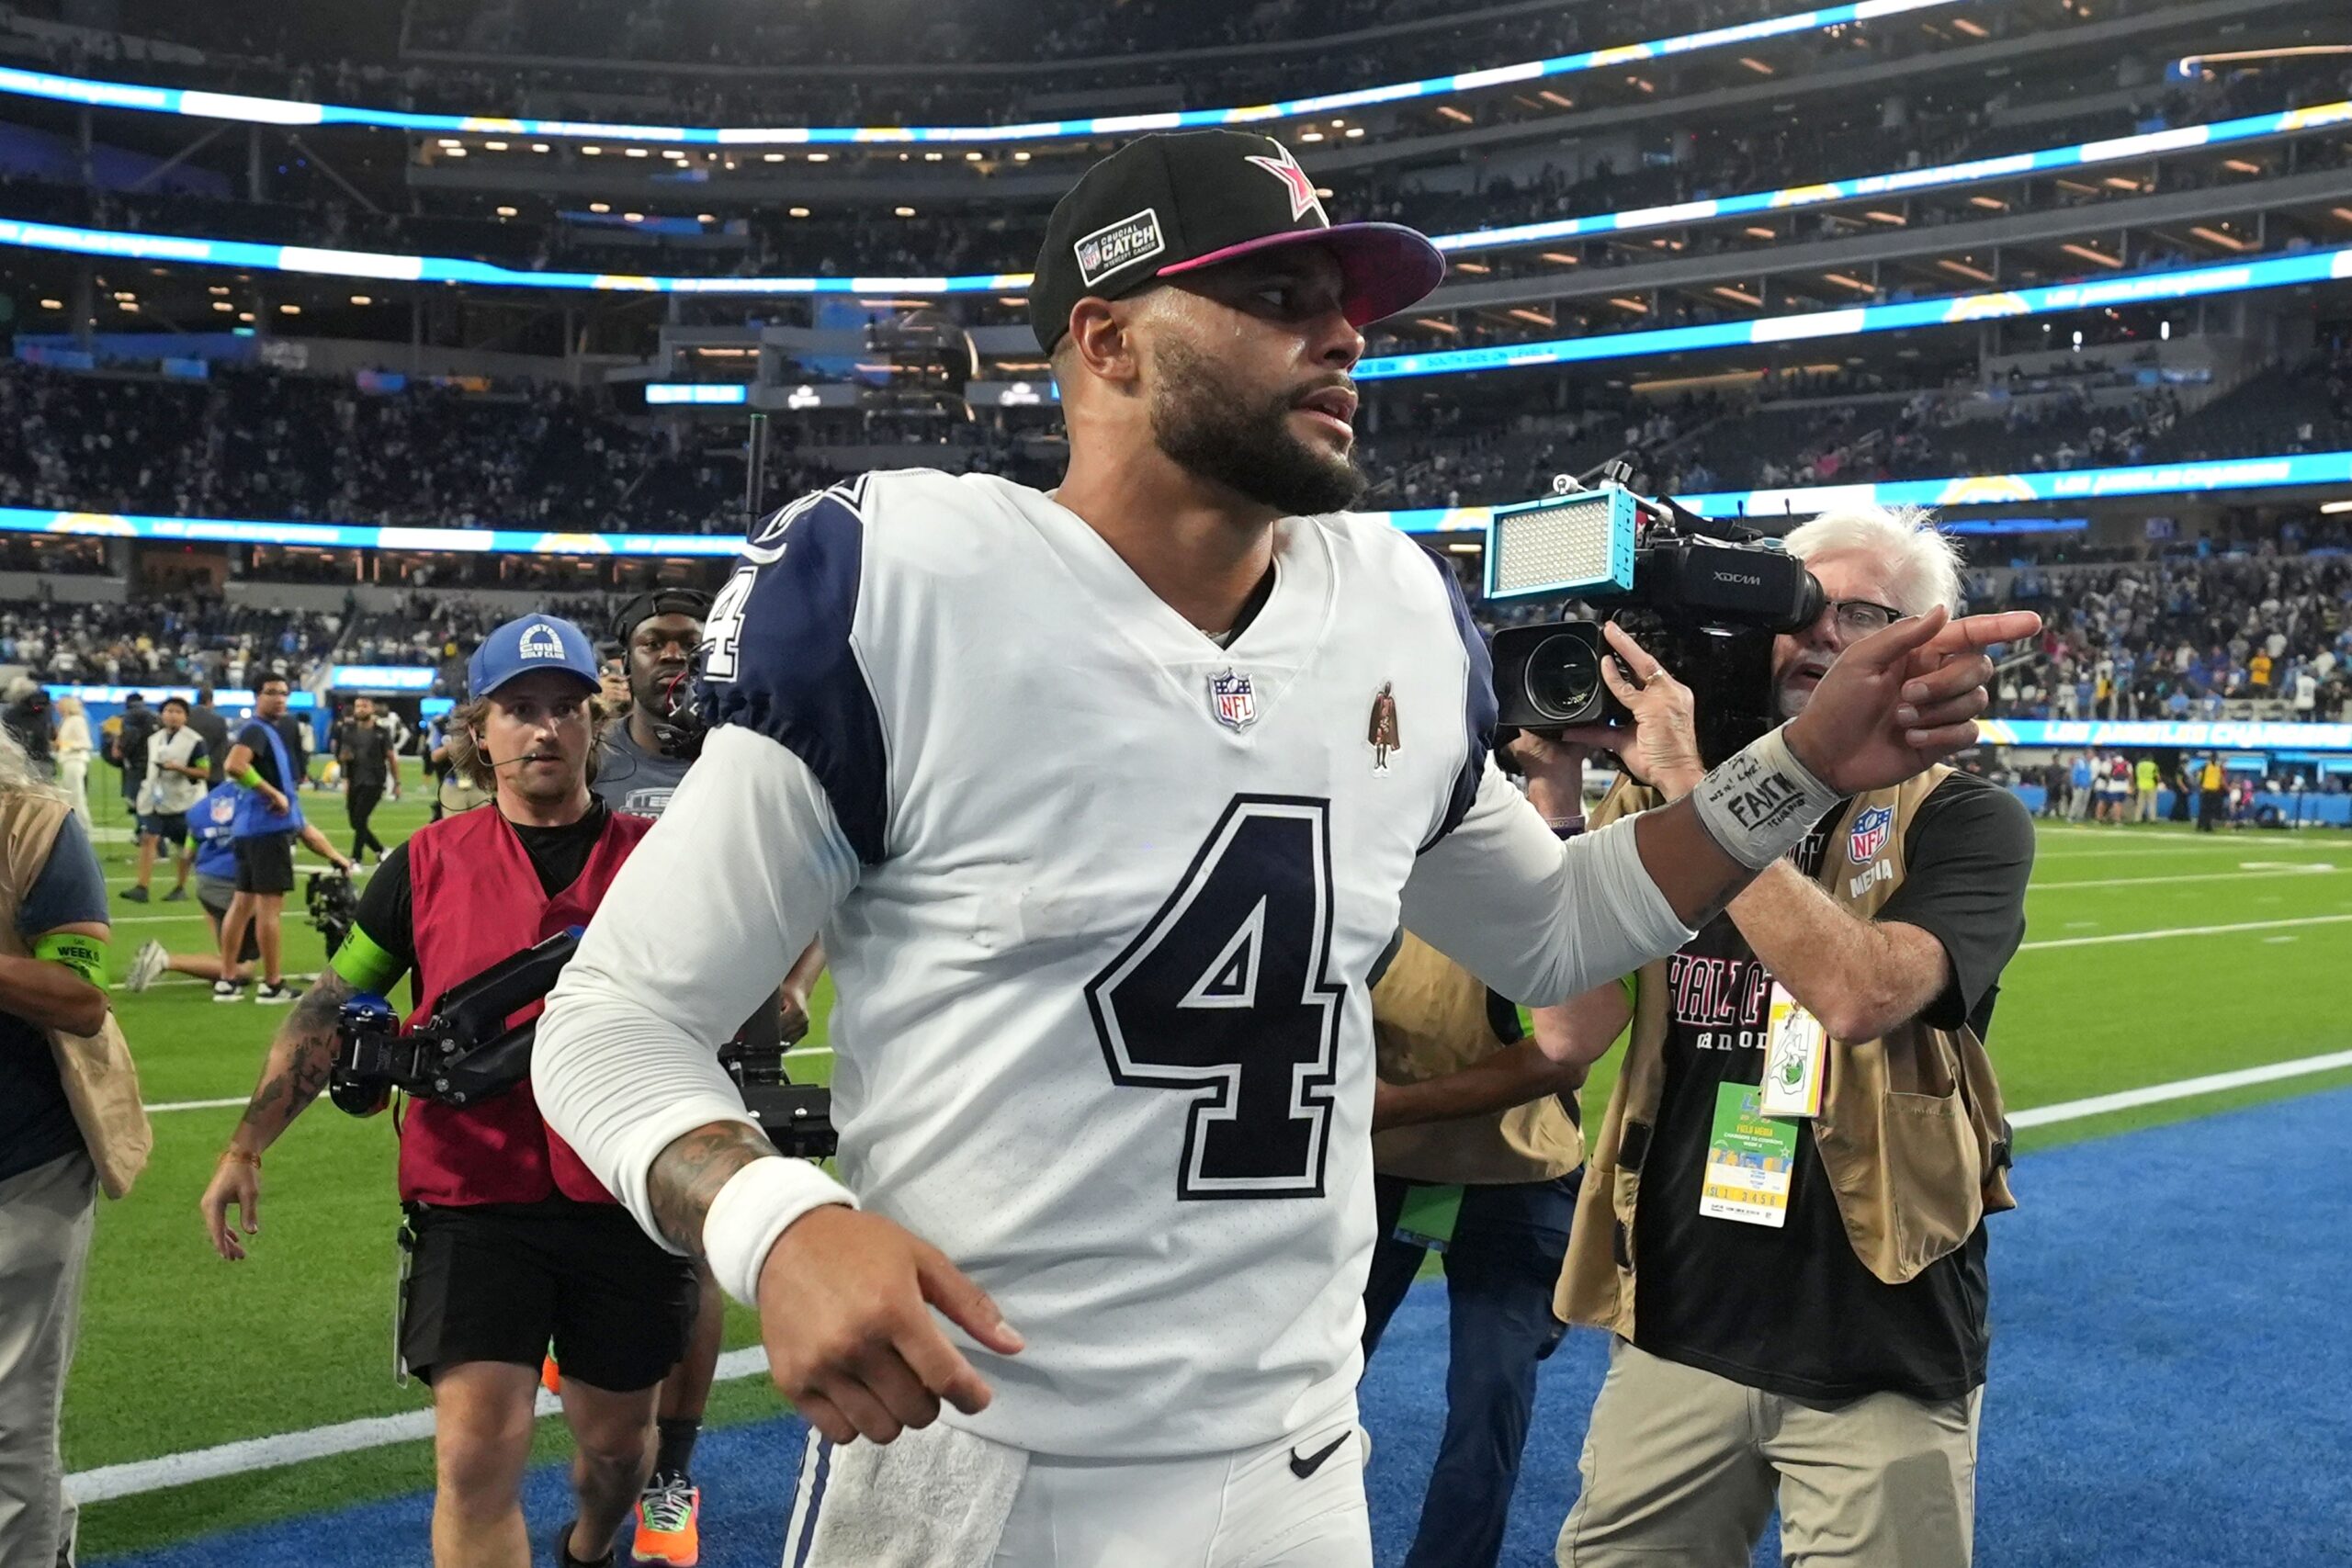 Pour Honey On Me" - Dak Prescott Expresses Confidence Heading Into Matchup With Eagles